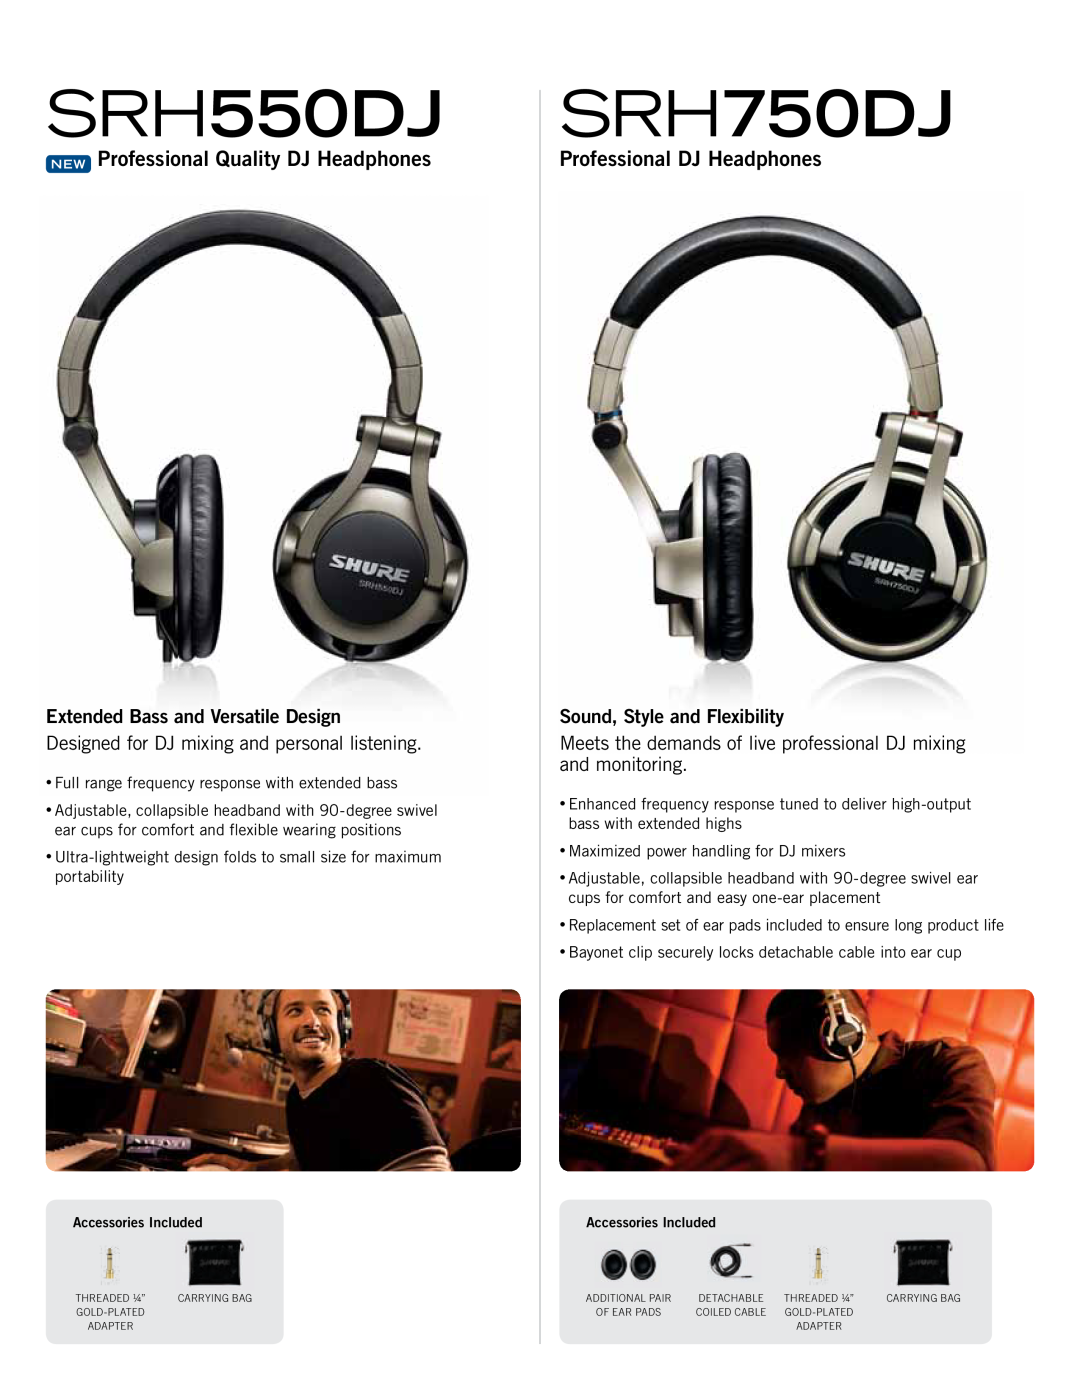 Shure SRH440 SRH240 manual NEW Professional Quality DJ Headphones, Professional DJ Headphones, Sound, Style and Flexibility 